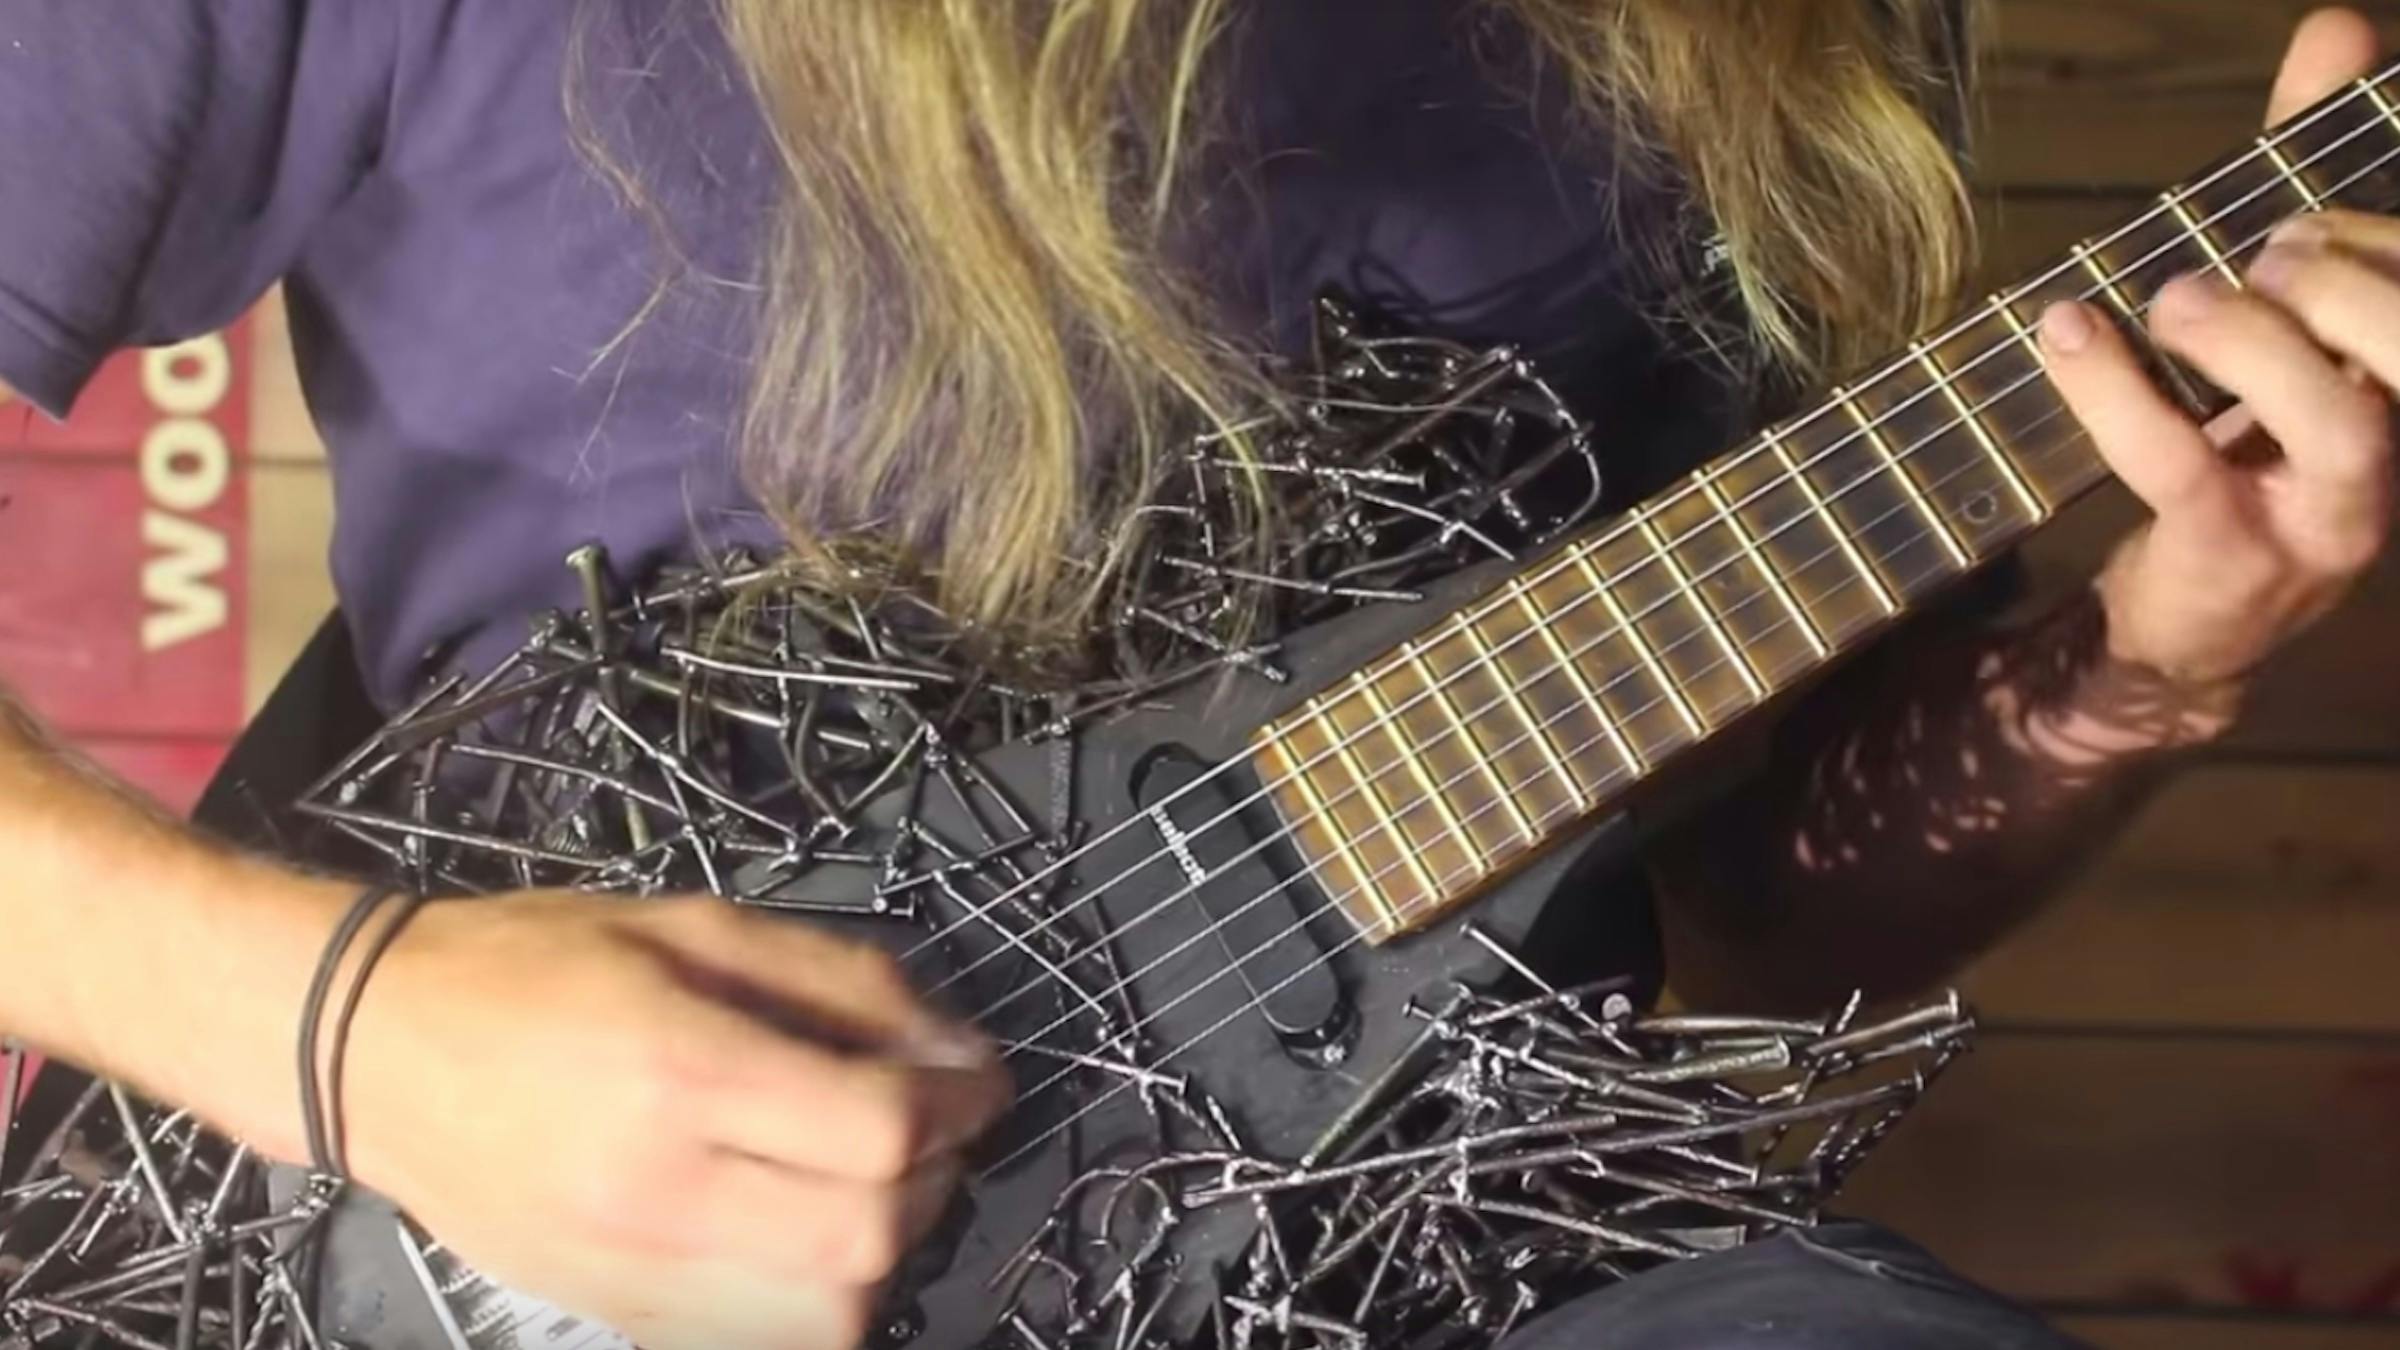 This Guitar Made Of Nails Is Literally Metal AF